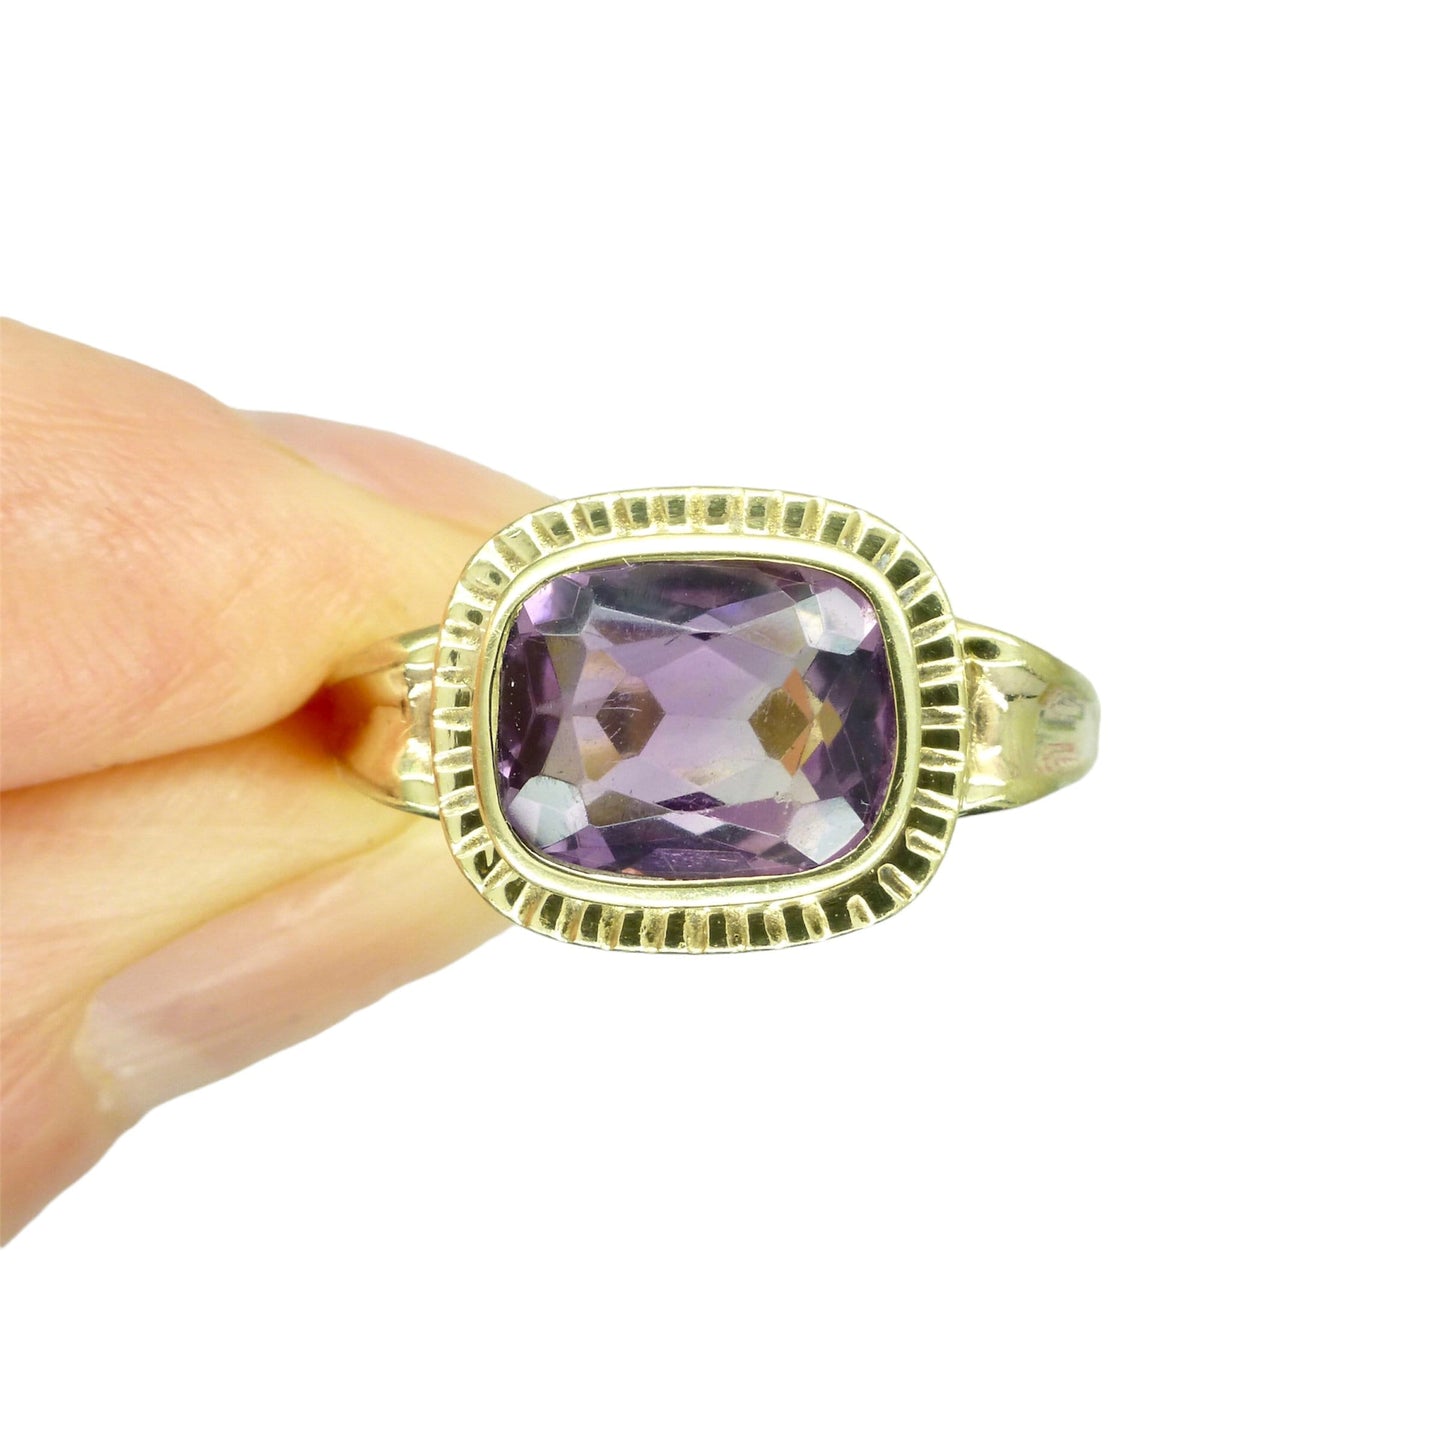 Vintage 9ct gold cushion cut Amethyst solitaire ring